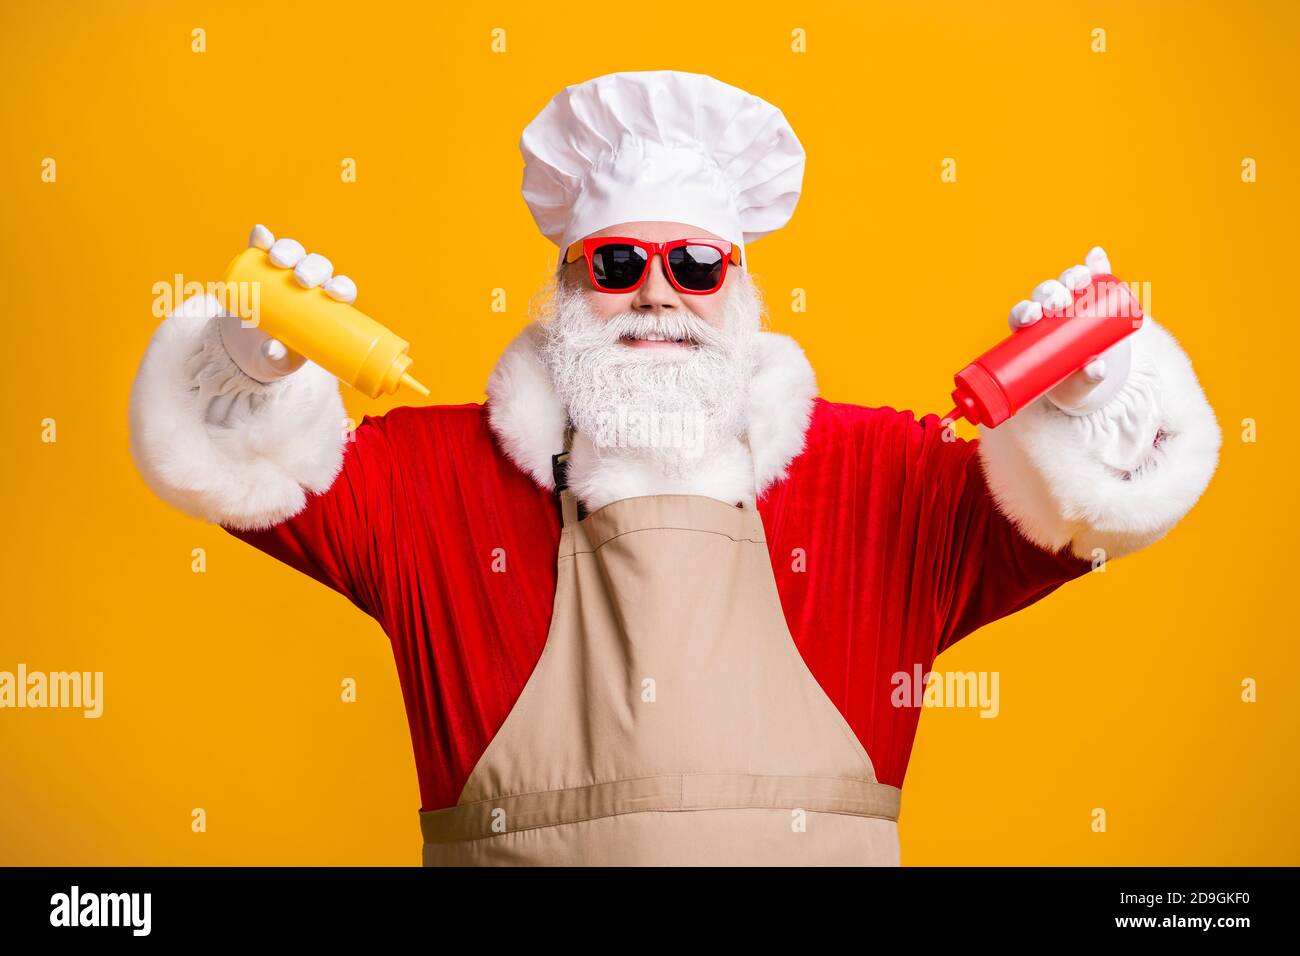 Photo of white grey hair beard santa claus in chef cap squeeze bottle ketchup mustard x-mas christmas eve feast wear apron sunglass isolated bright Stock Photo